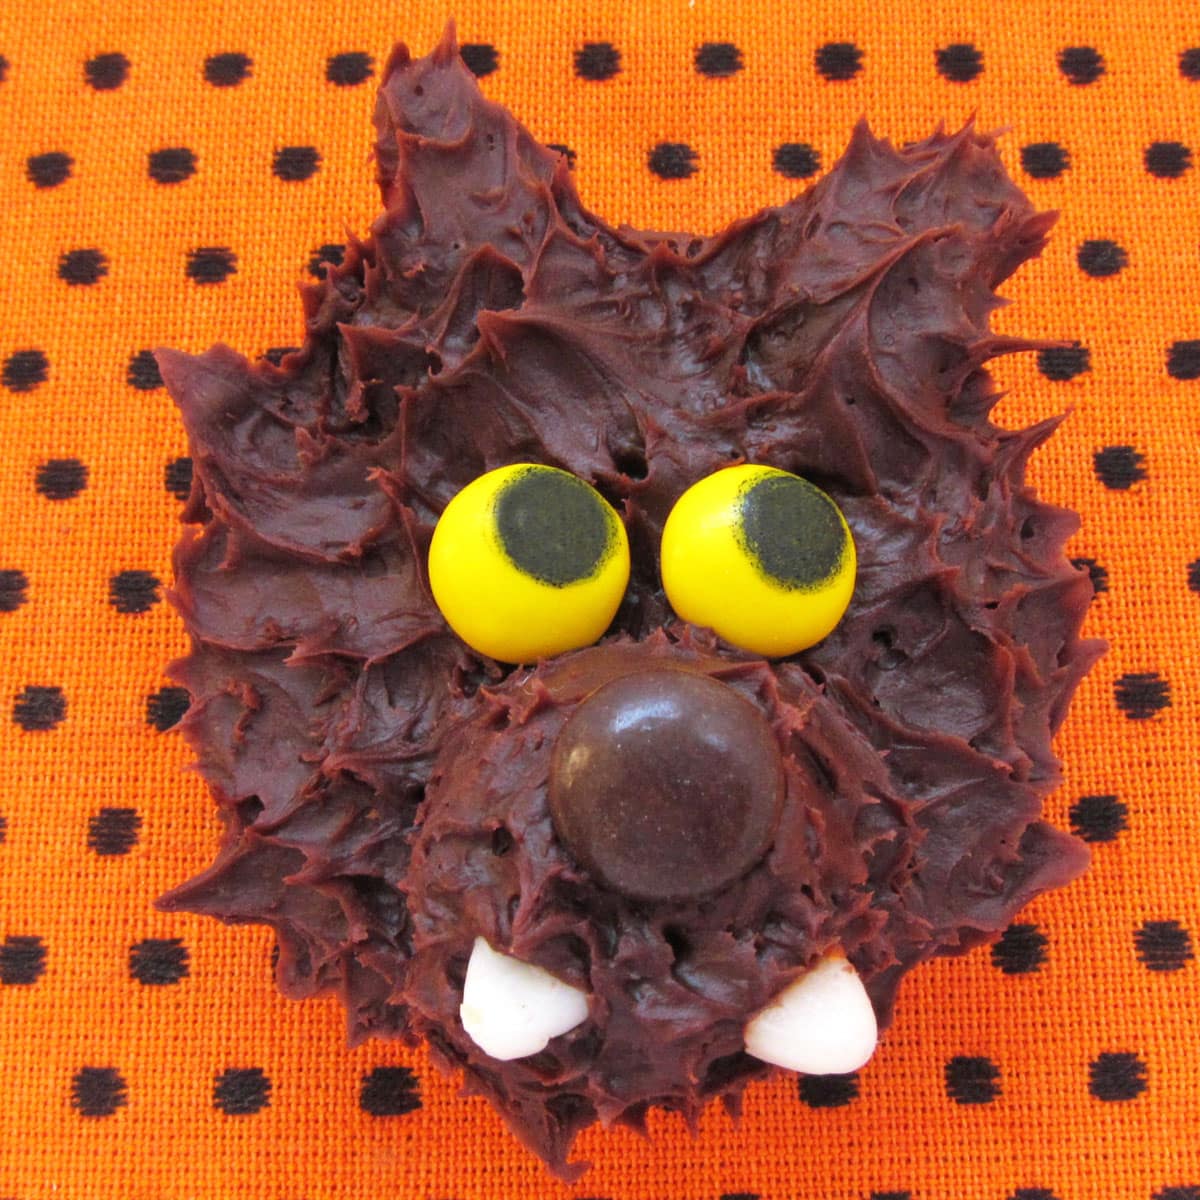 werewolf cake frosted with chocolate frosting.